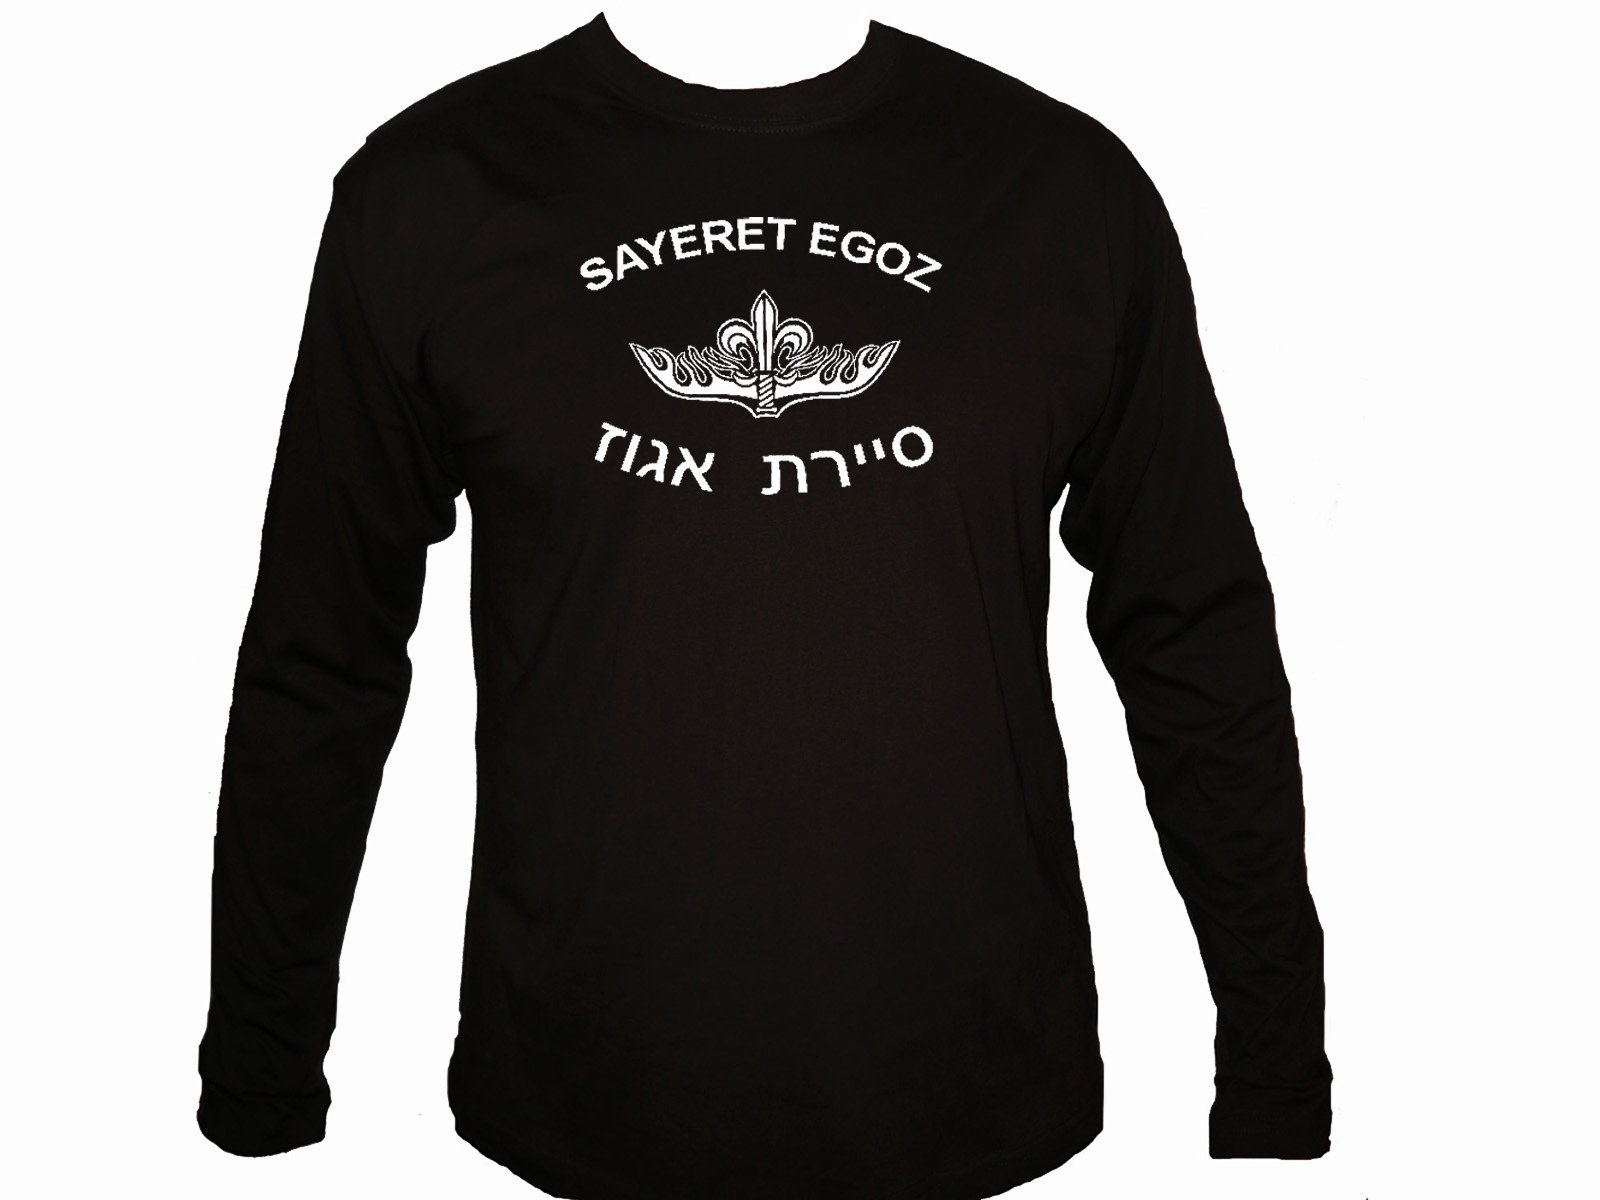 Israel army special forces Sayeret Egoz sleeved t-shirt